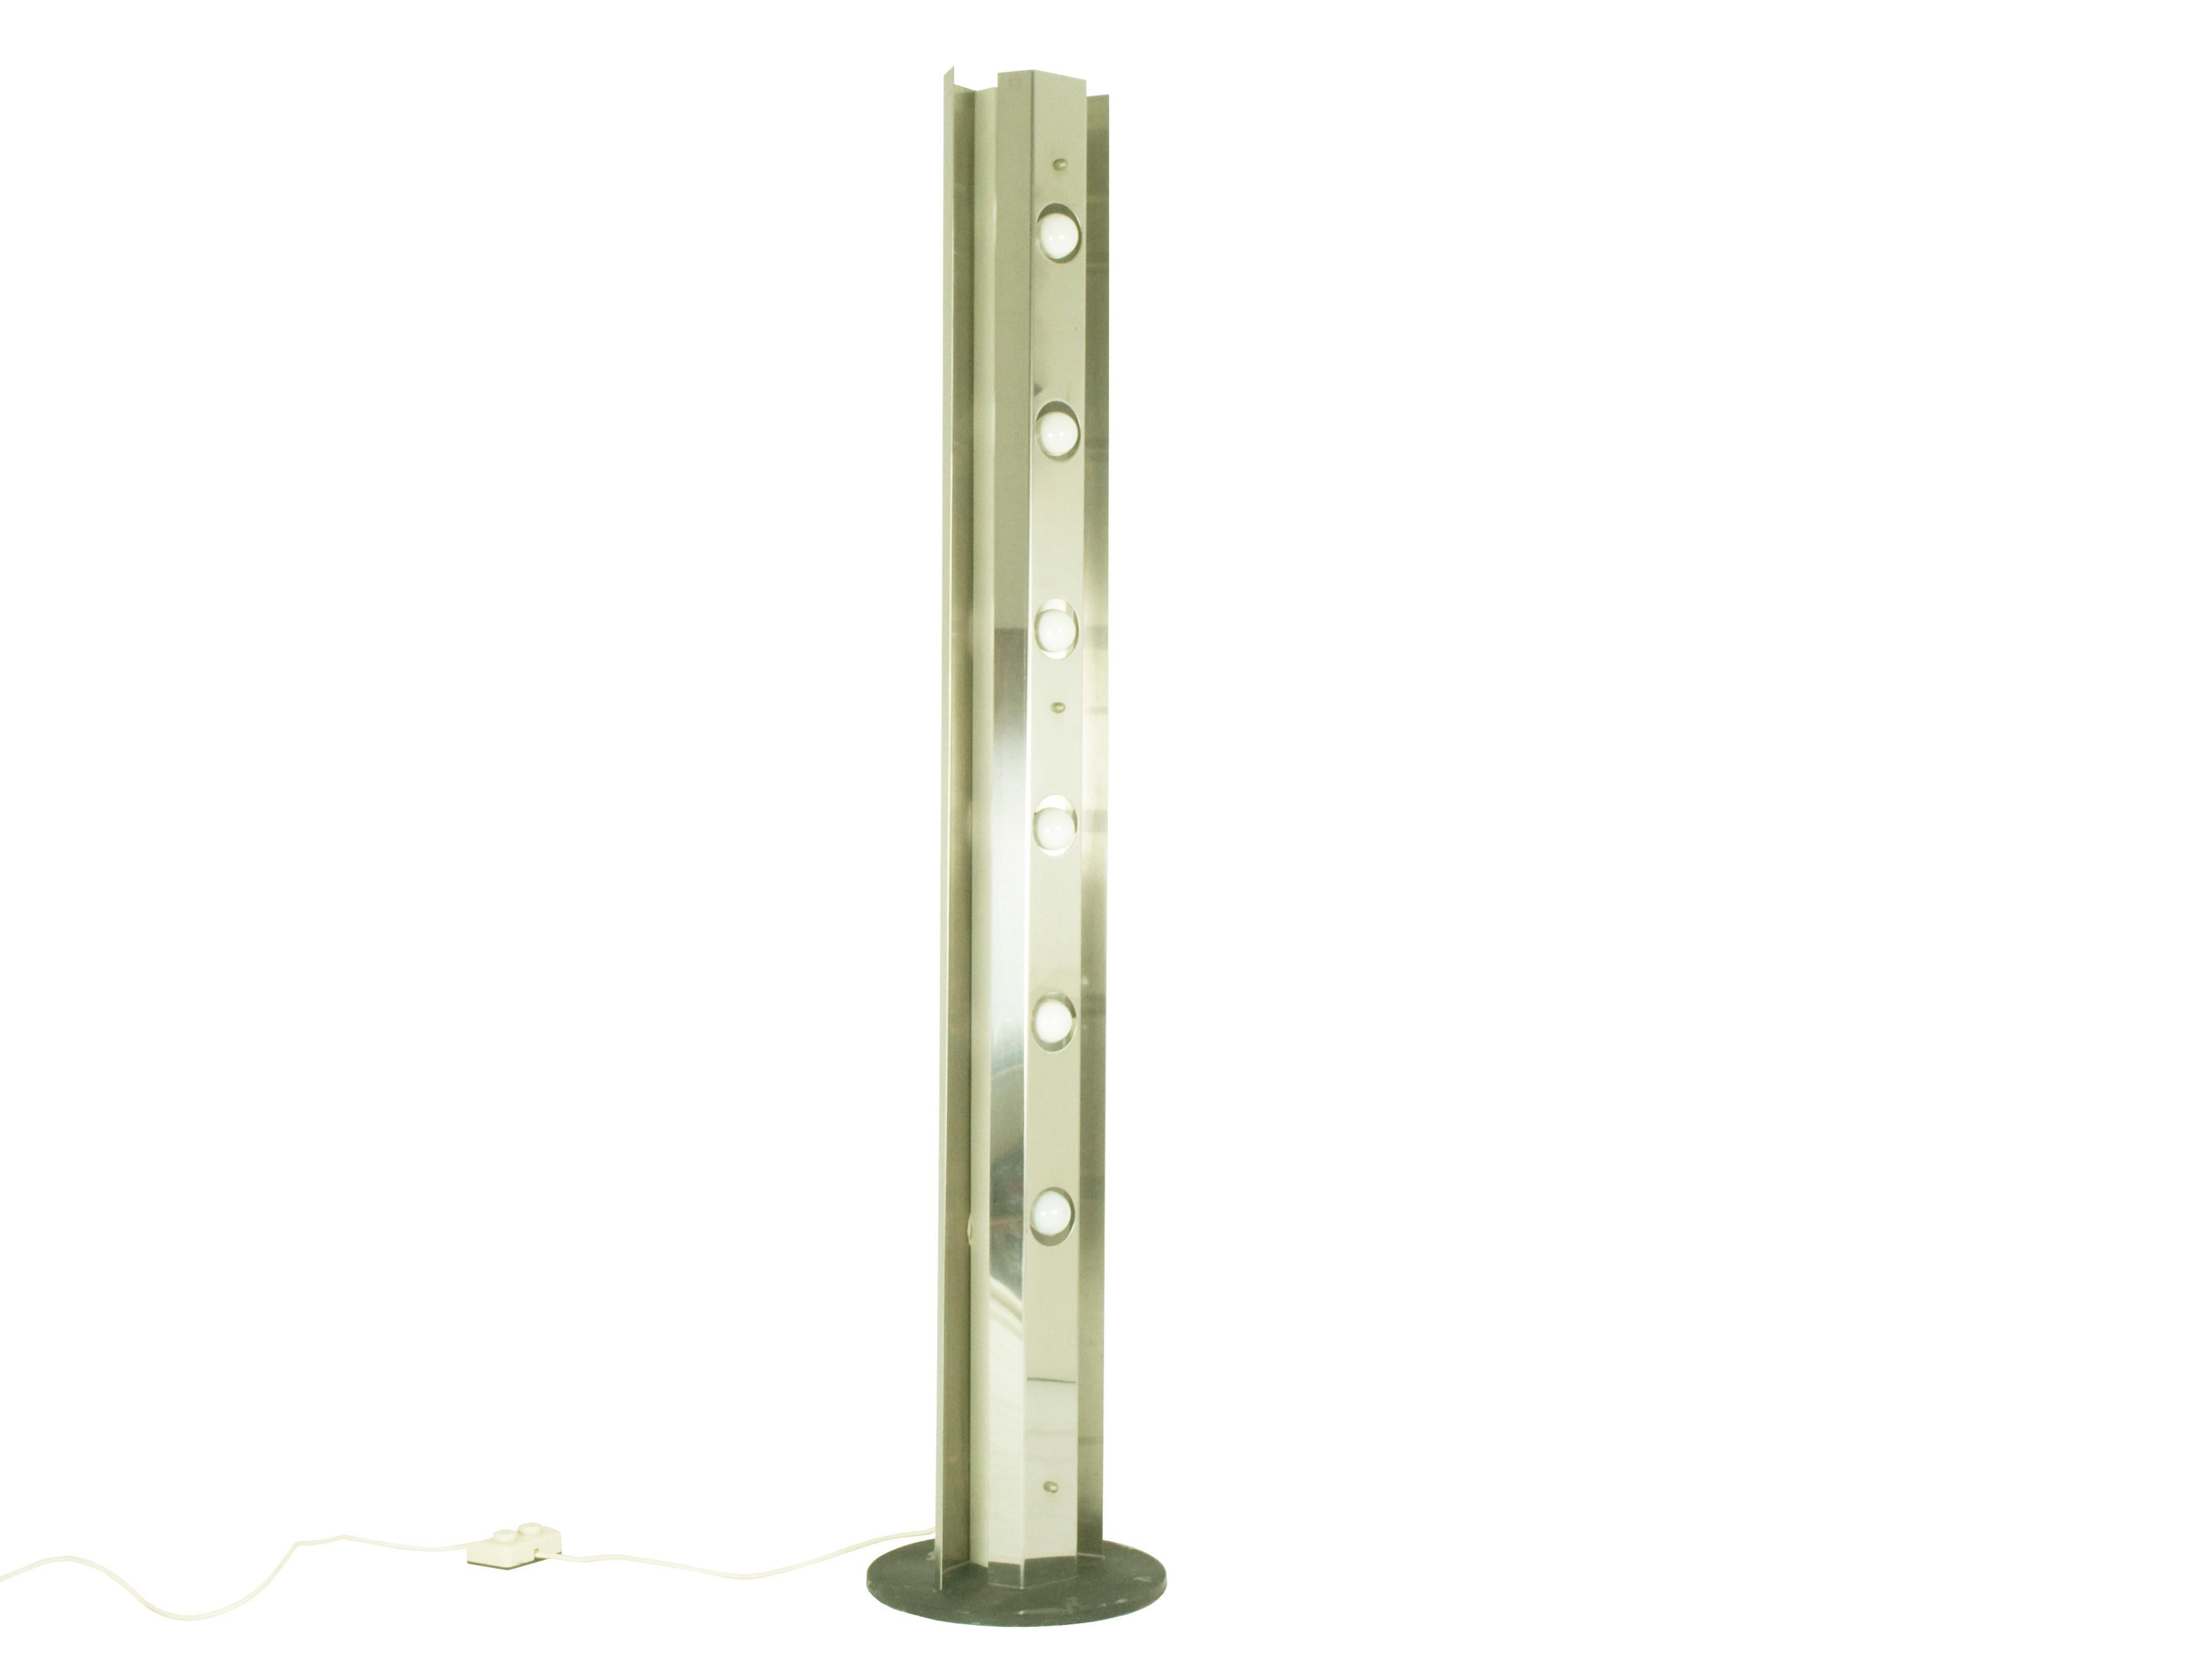 This floor lamp is made by two bent metal sheets with a circular base. It features 6 light sources that can be alternately switched on thanks to its double switch. The lamp remains in pretty good condition: visible 